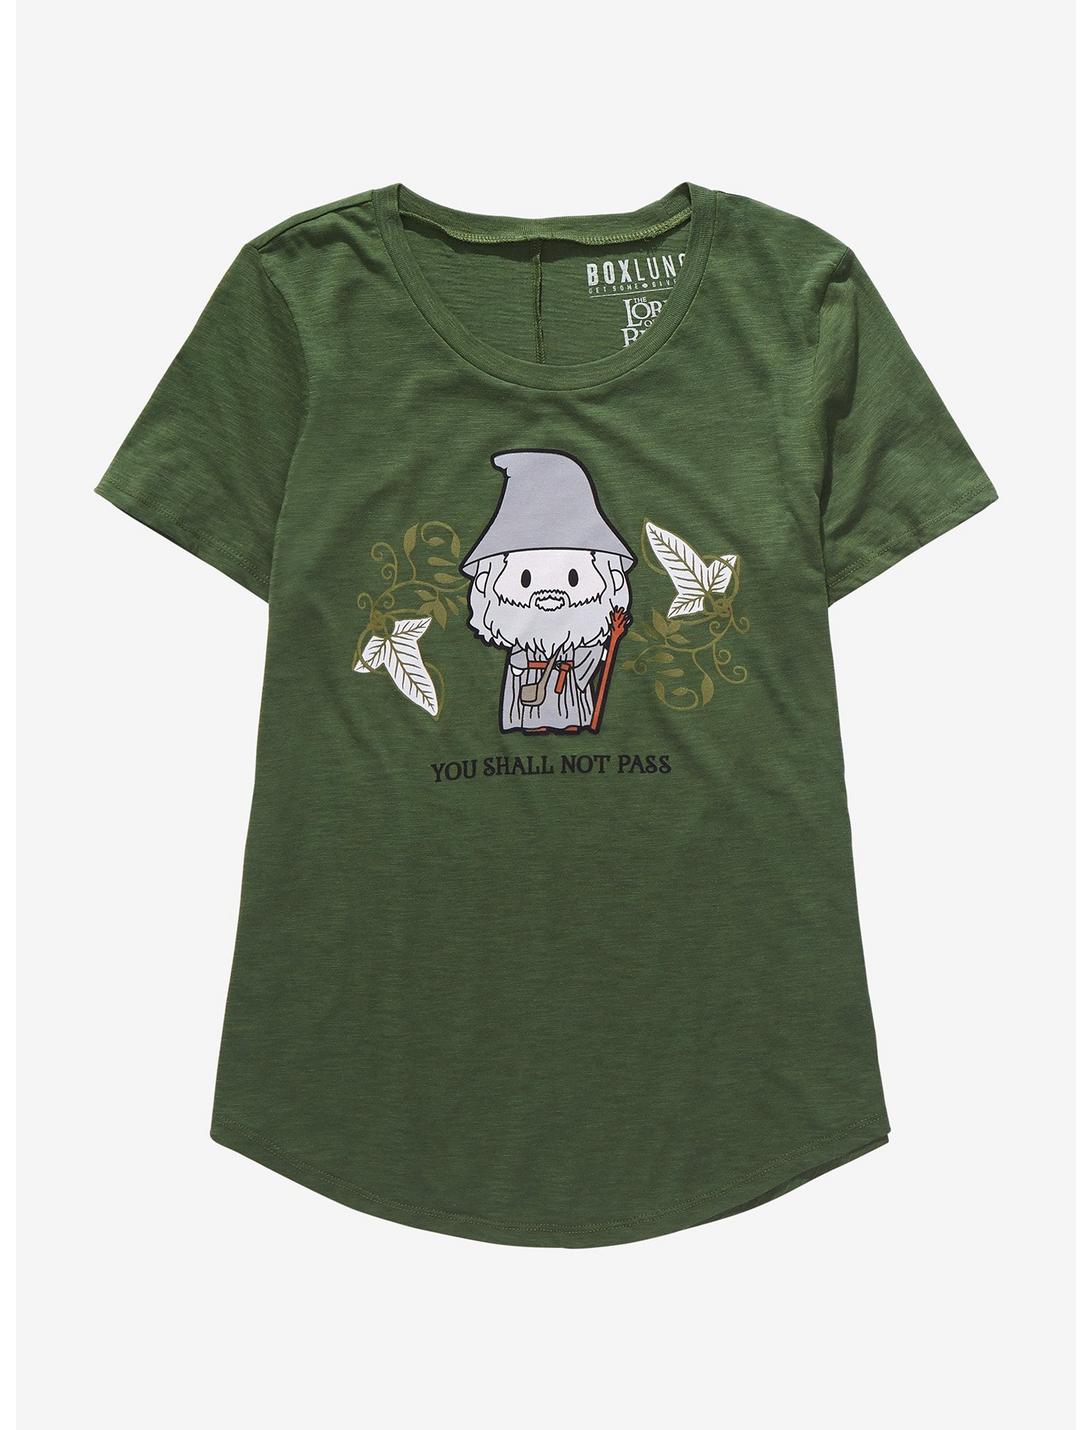 The Lord of the Rings Chibi Gandalf Women's Scoop-Neck T-Shirt - BoxLunch Exclusive, OLIVE, hi-res